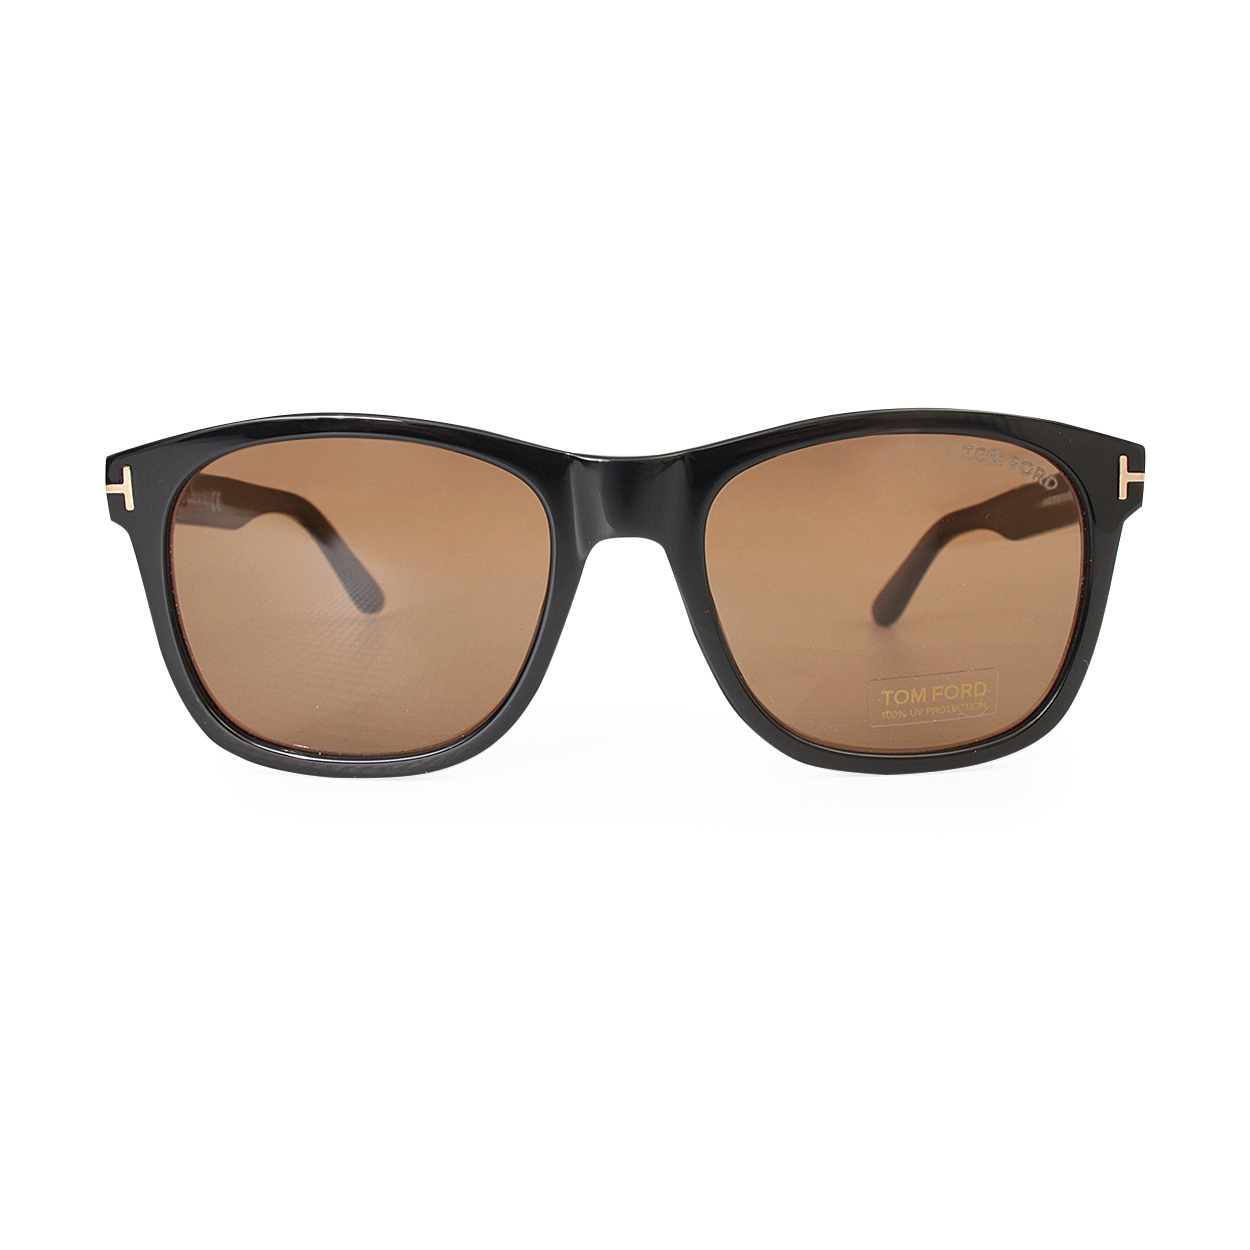 TOM FORD Eric-02 Sunglasses TF595 Black - NEW | Luxity